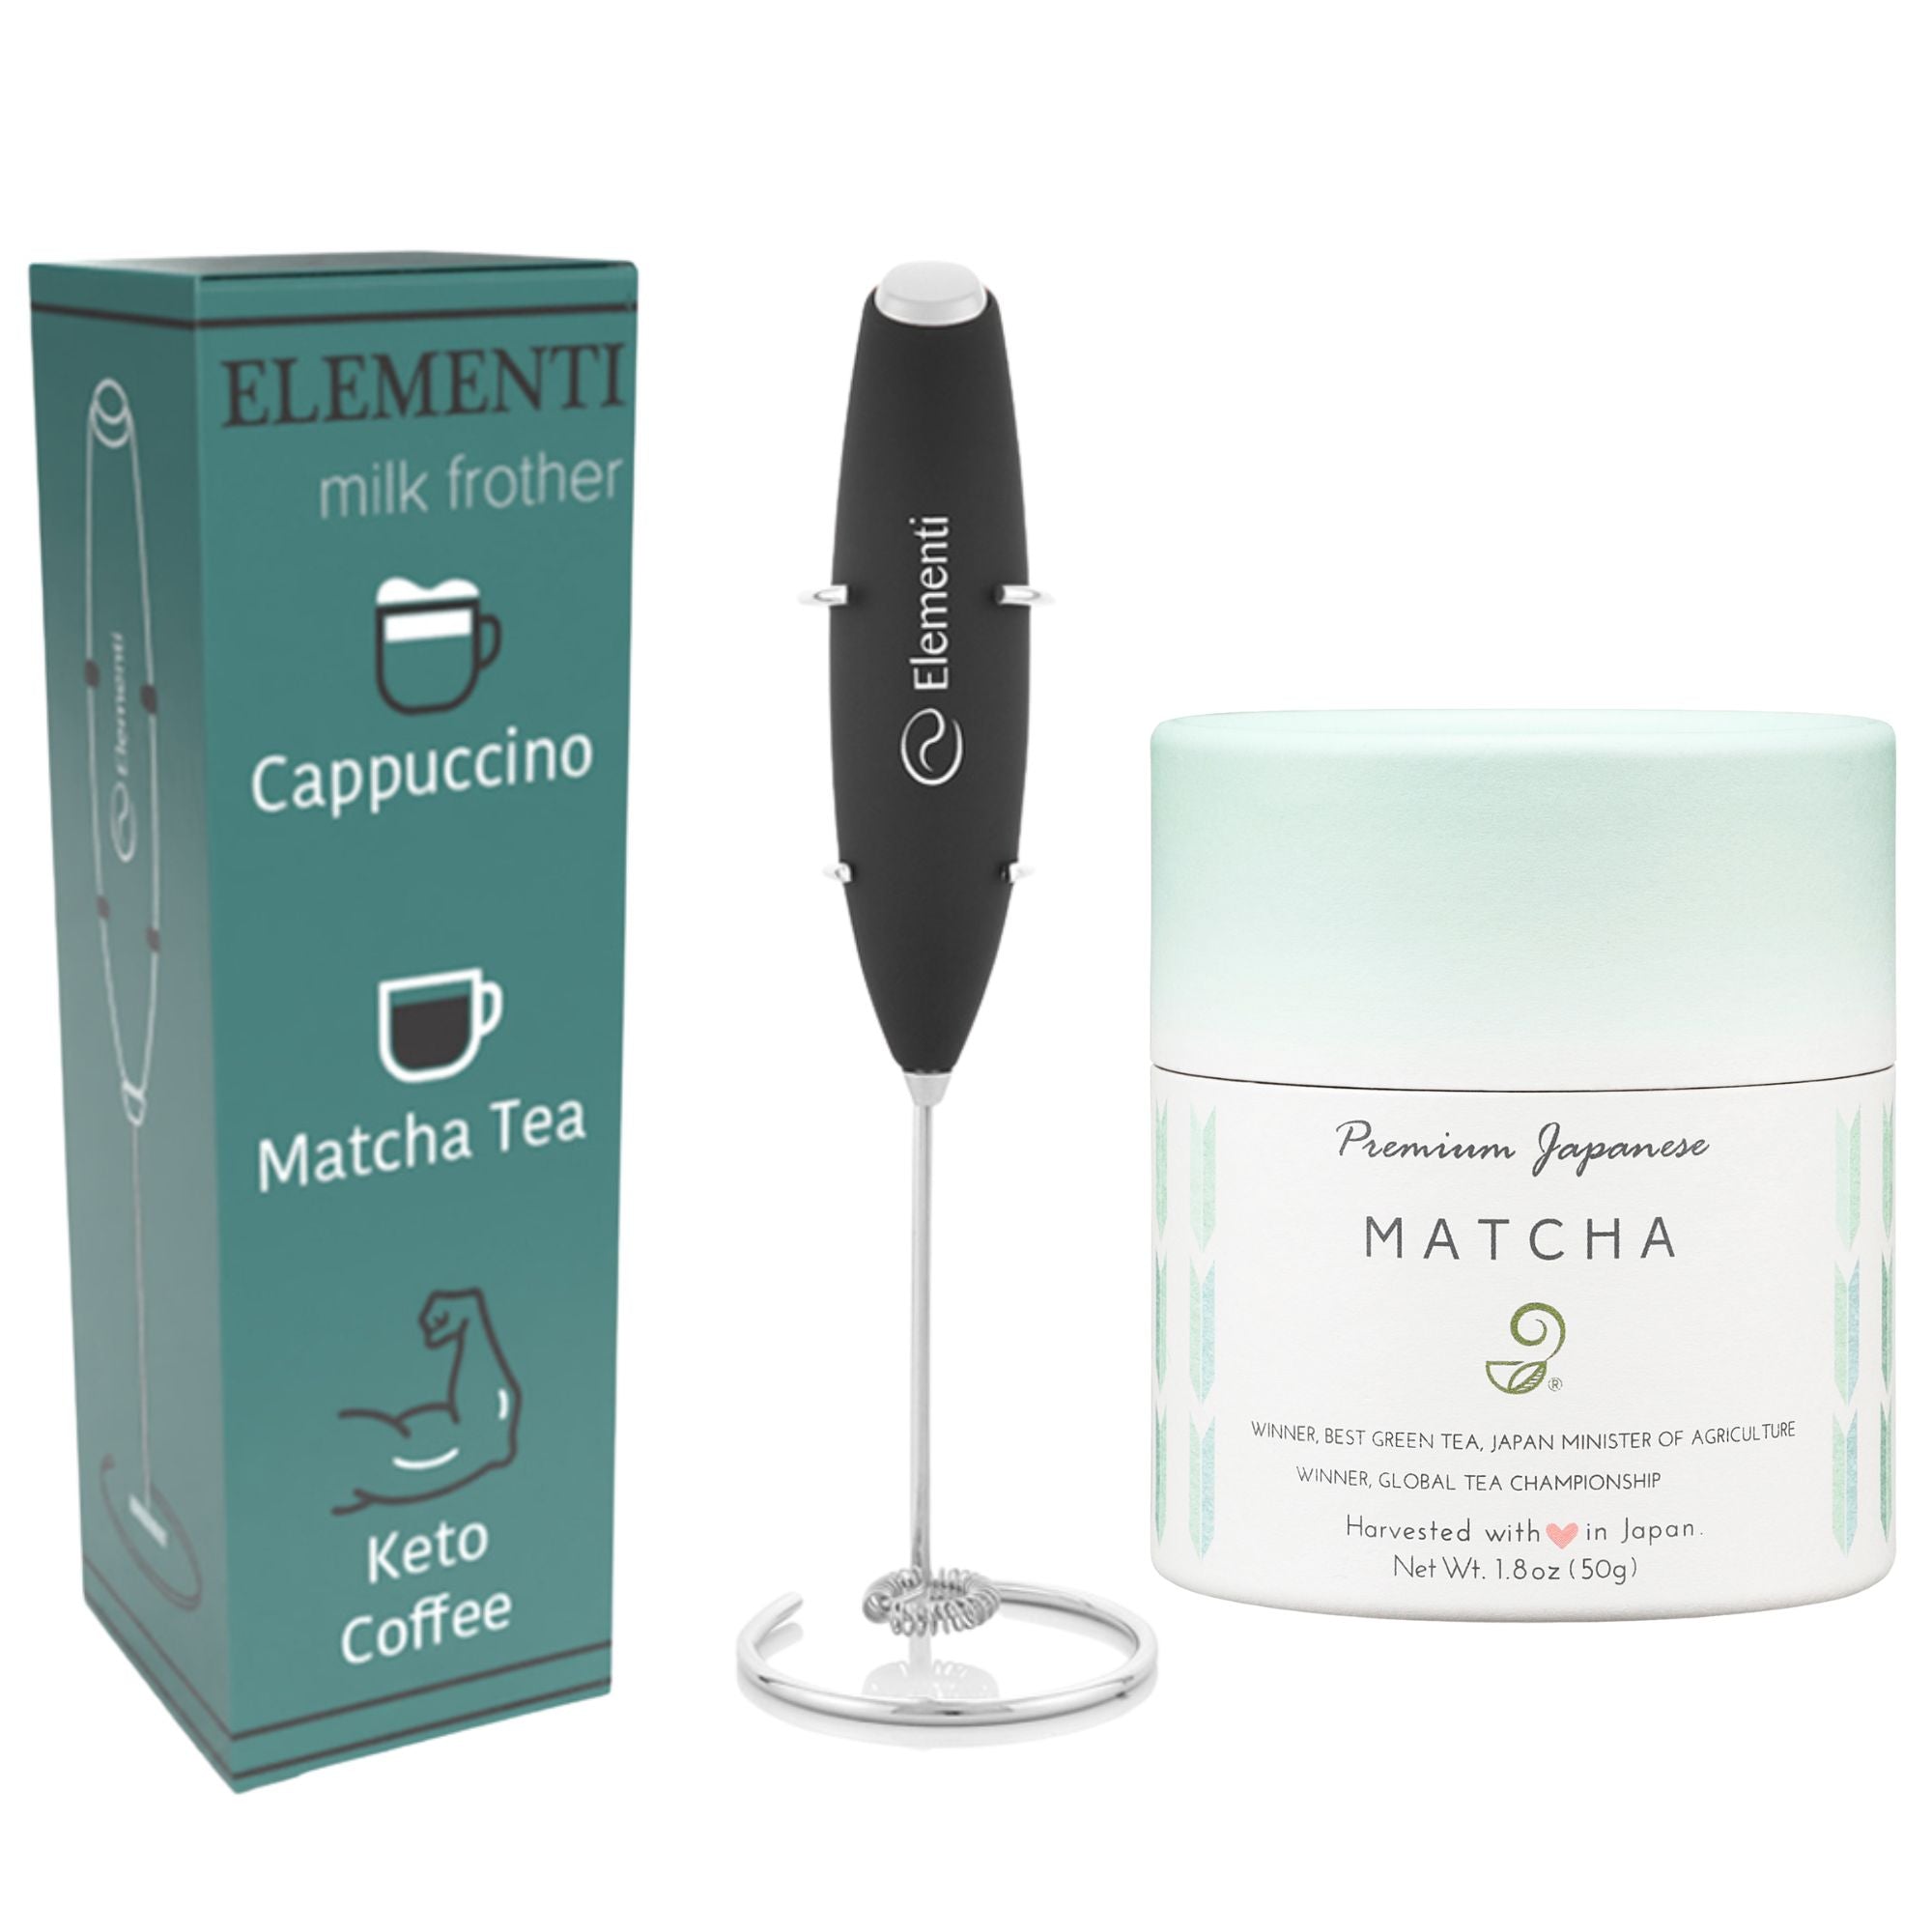 Premium Japanese Powdered Green Tea and Electric Matcha Whisk